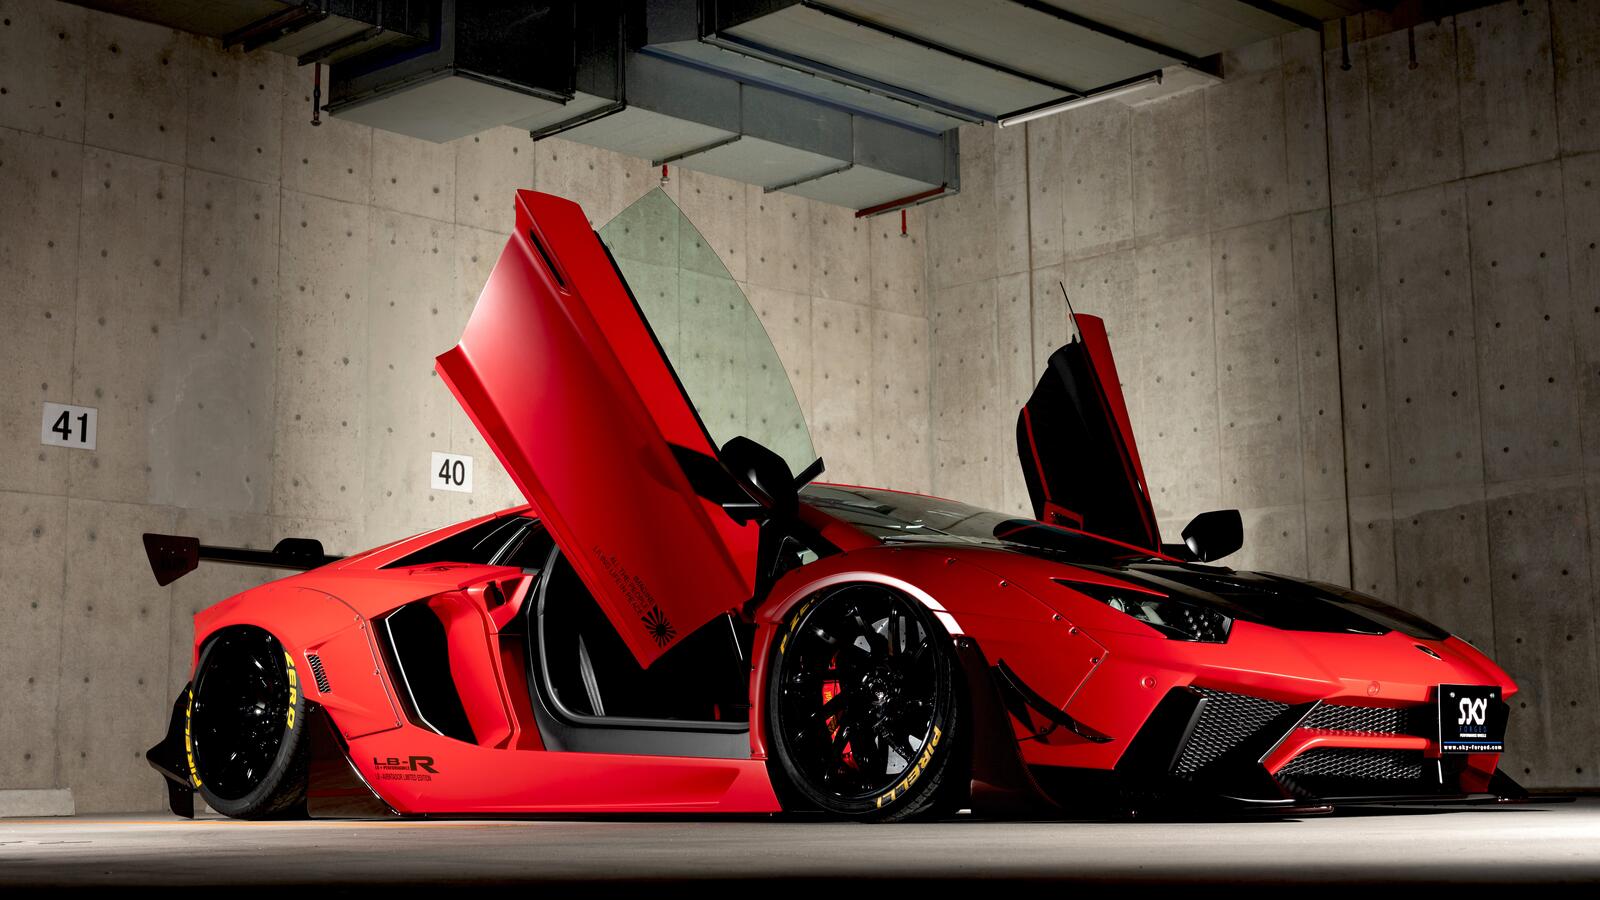 Wallpapers wallpaper lamborghini aventador limited edition cars side view on the desktop